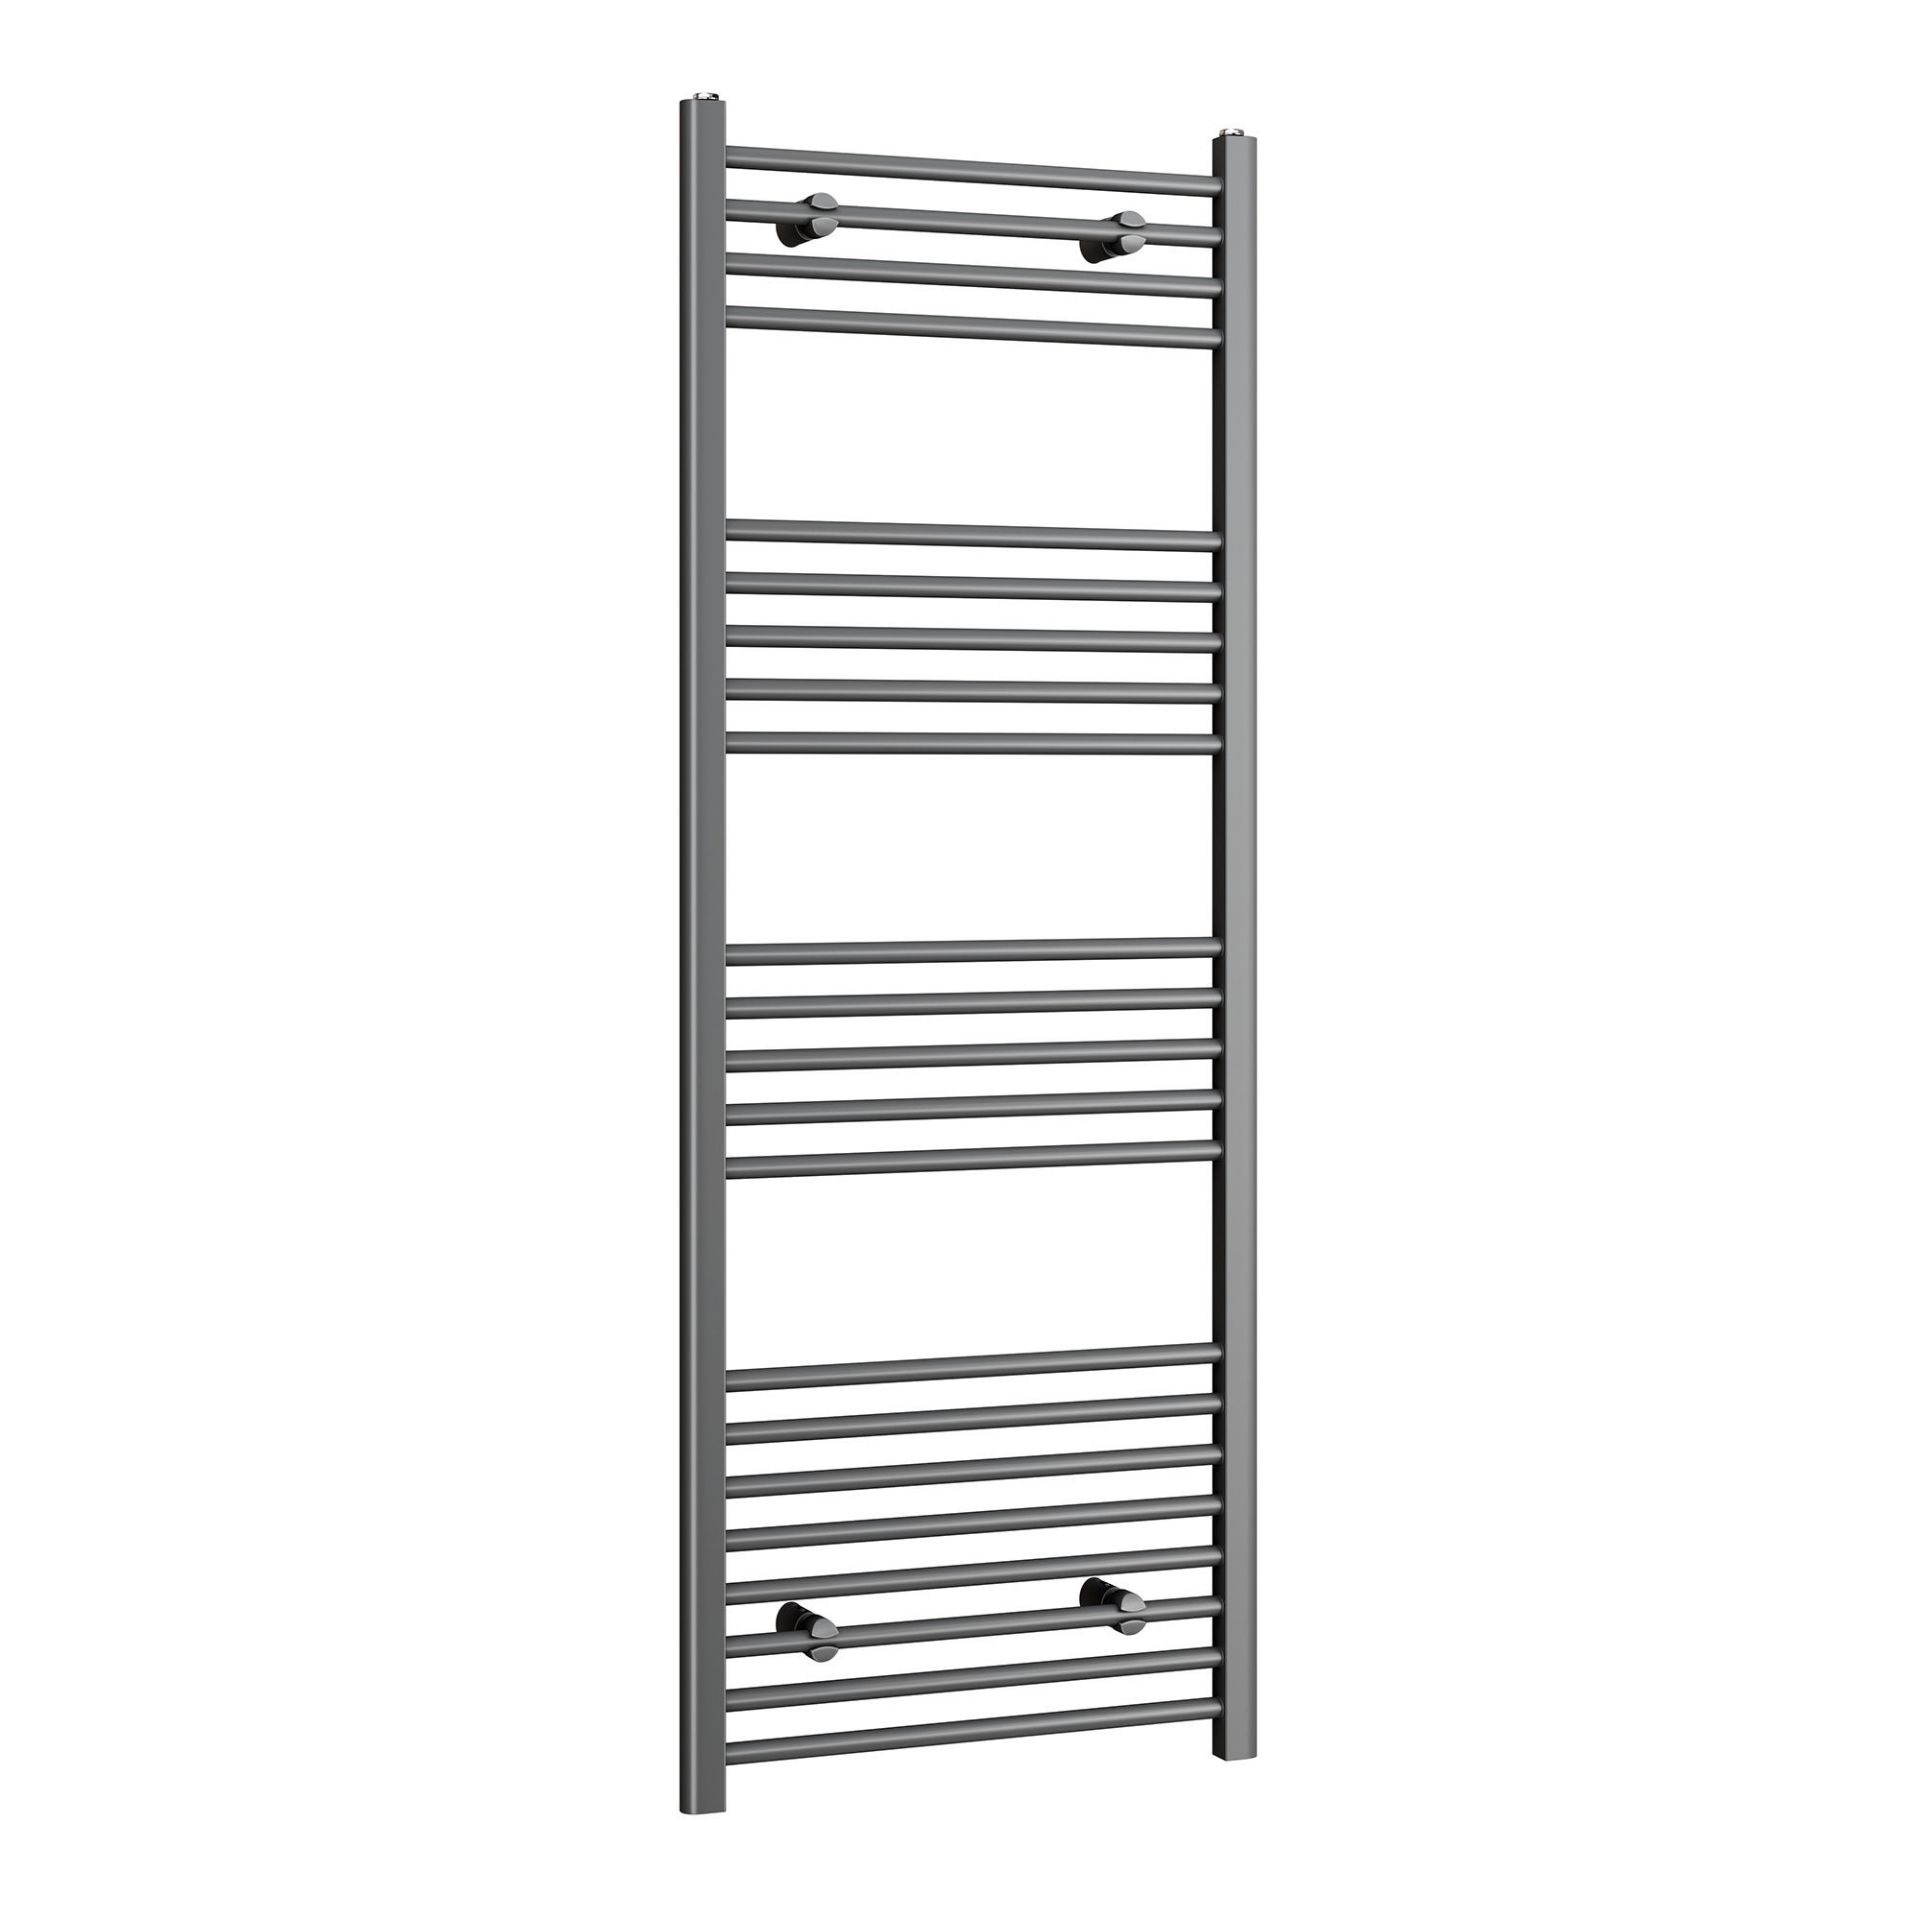 (PT98) 1600x600mm - 20mm Tubes - Anthracite Heated Straight Rail Ladder Towel Radiator. Corrosion - Image 2 of 2